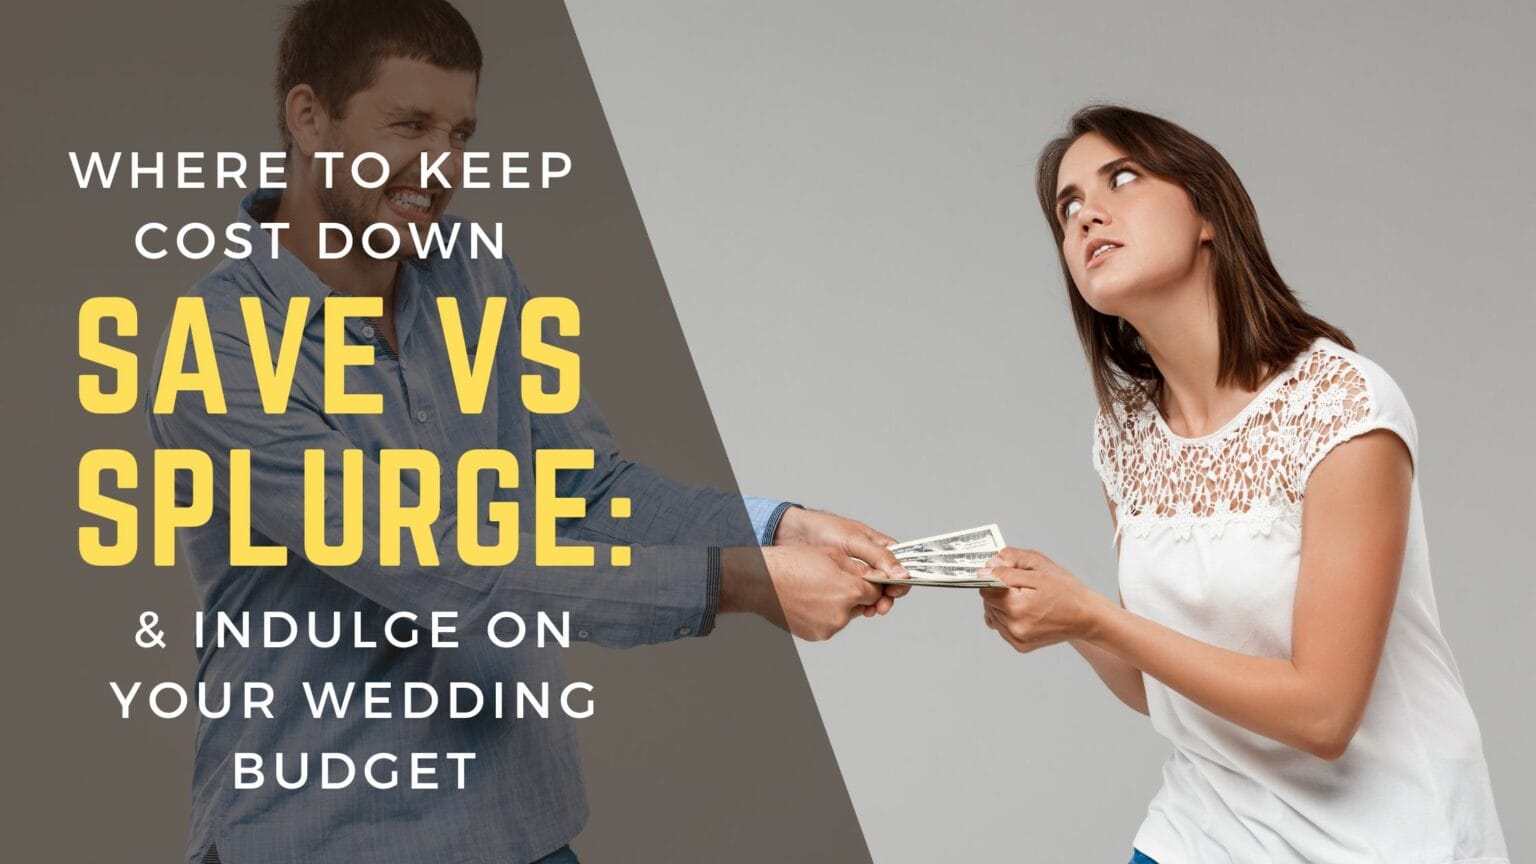 Save vs Splurge: Where to Keep Cost Down & Indulge on Your Wedding Budget